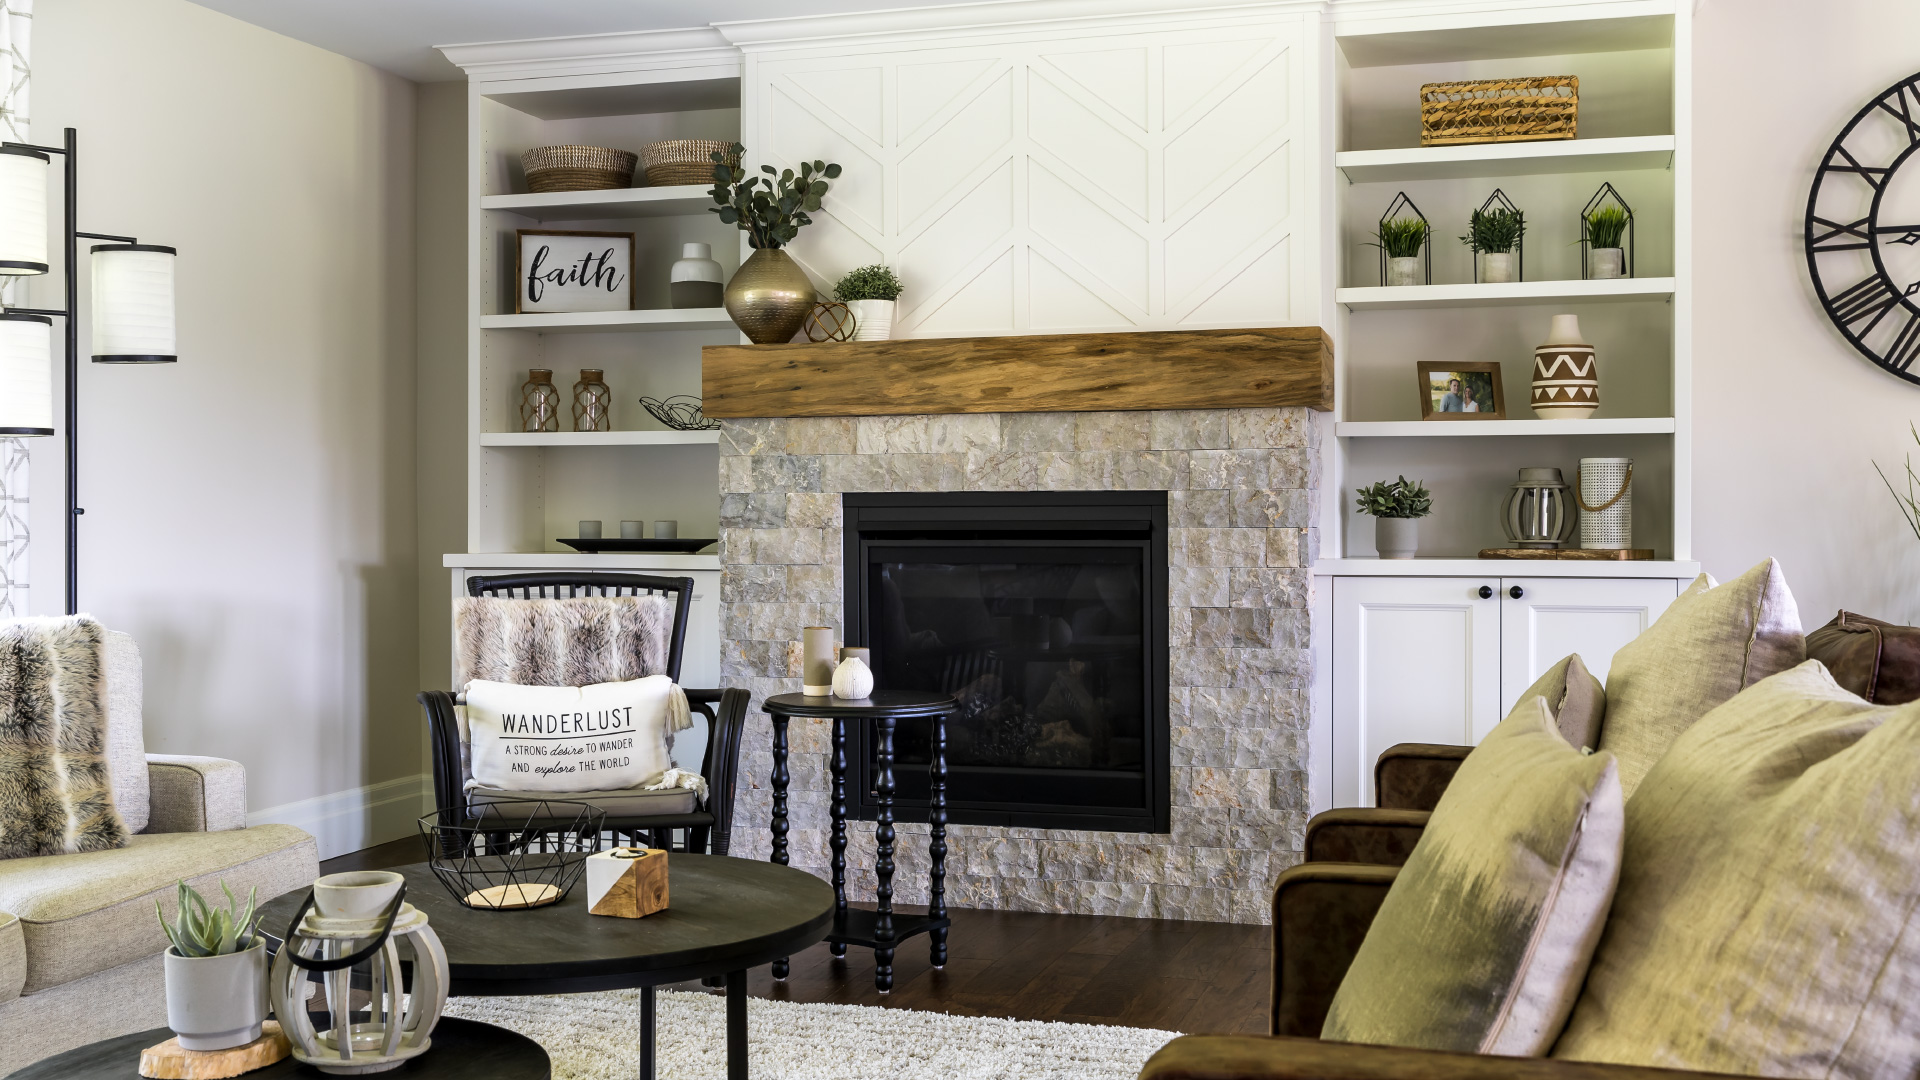 Custom fire place with shelves